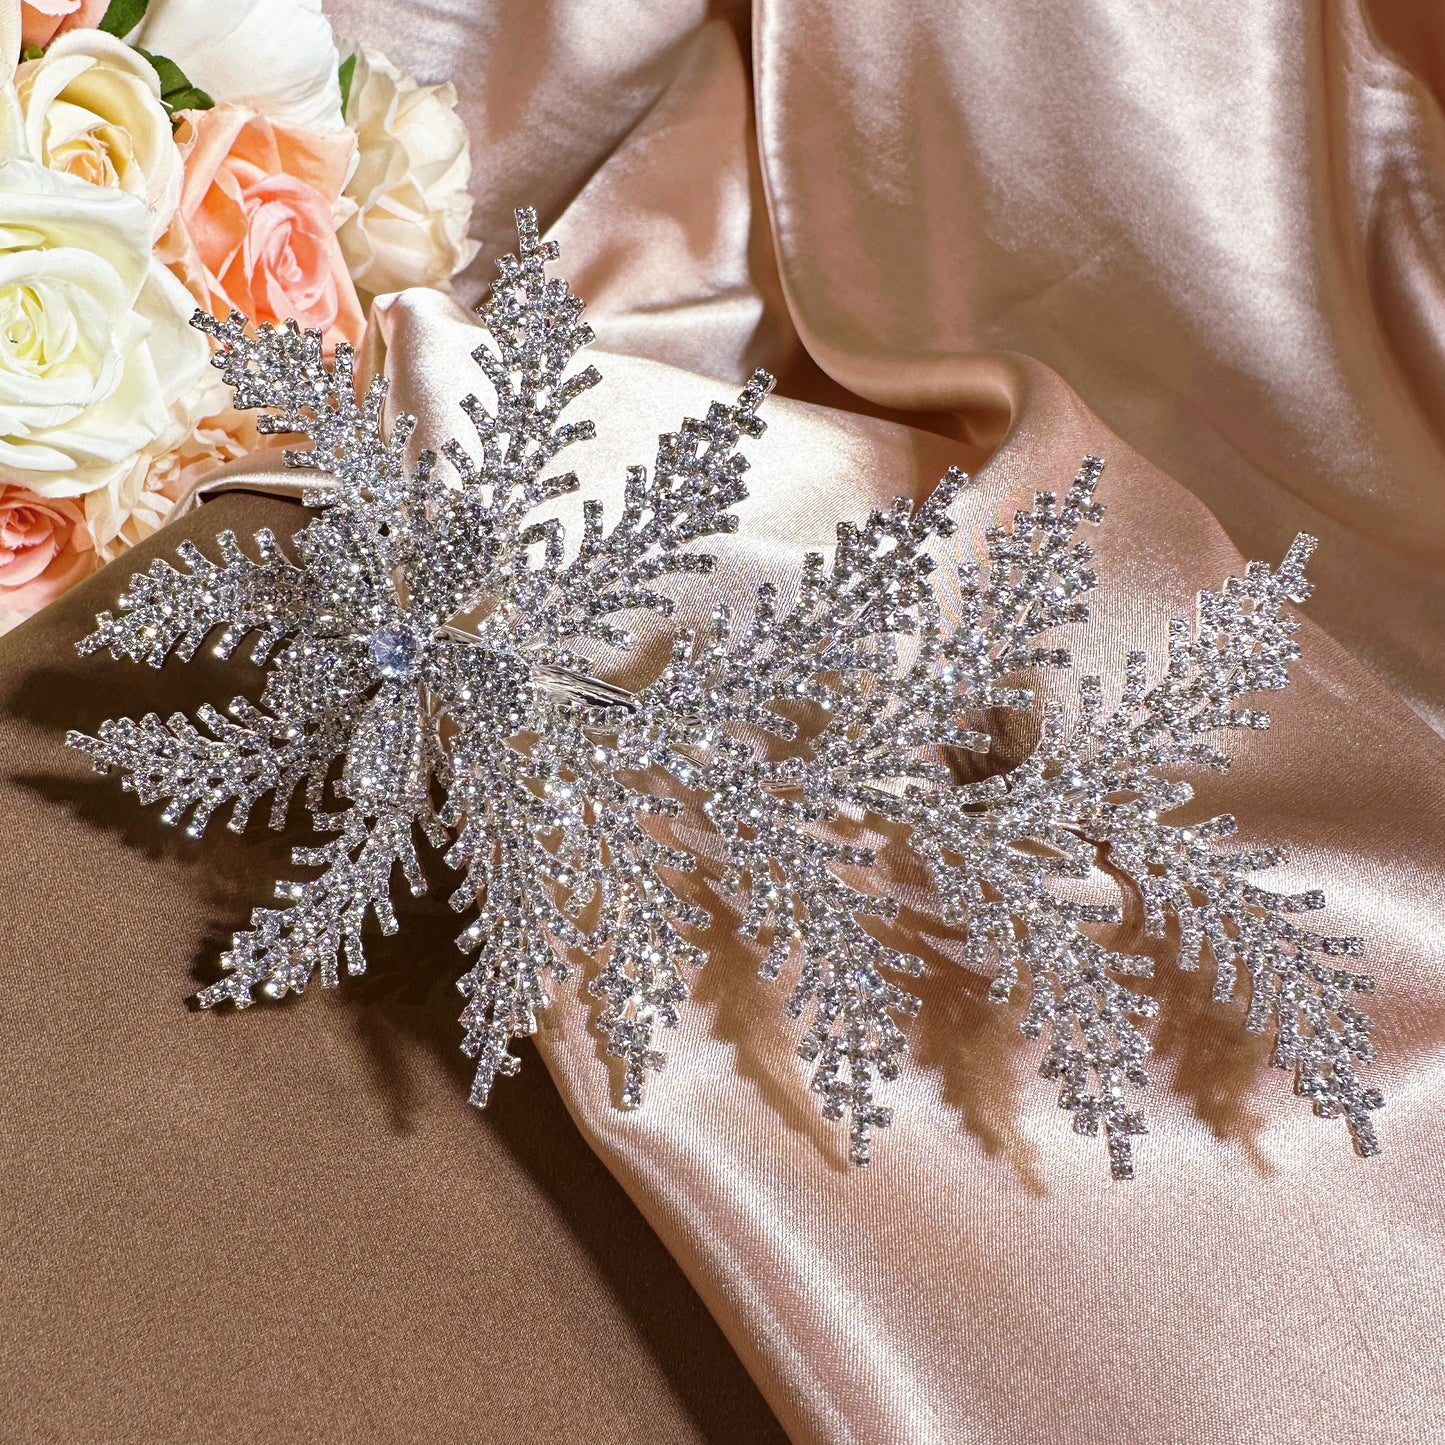 #08422069 Luxury Rhinestone Bridal Haircomb - Add a Touch of Glamour to Your Wedding Day Look